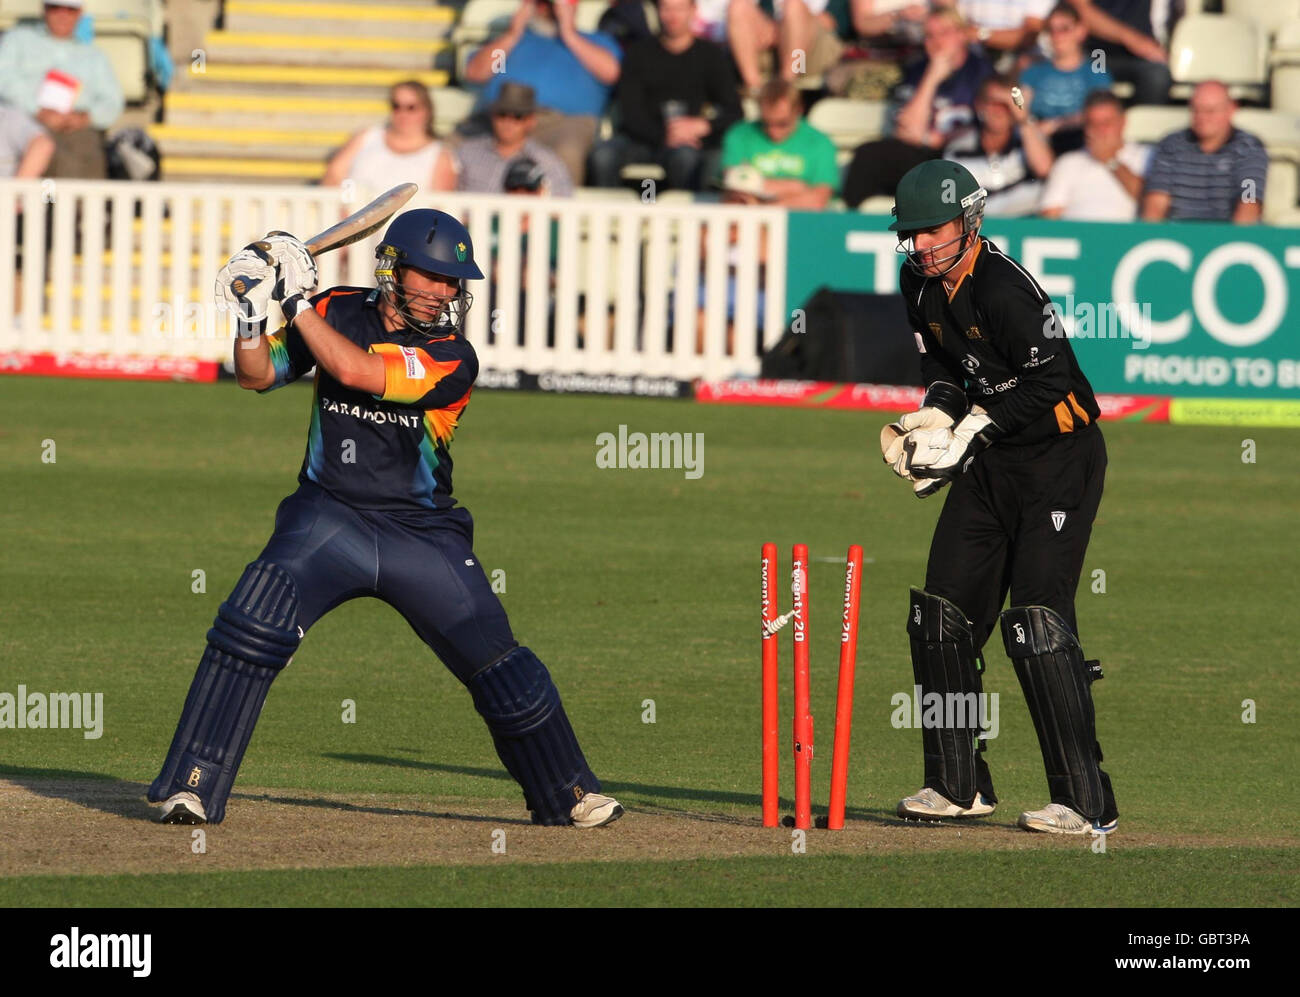 Glamorgan Dragons batsman Ryan Watkins is bowled by Worcestershire Royals Gareth Batty, watched by wicketkeeeper Steven Davies (right) during a Twenty 20 game at the County Ground, Worcester. Stock Photo